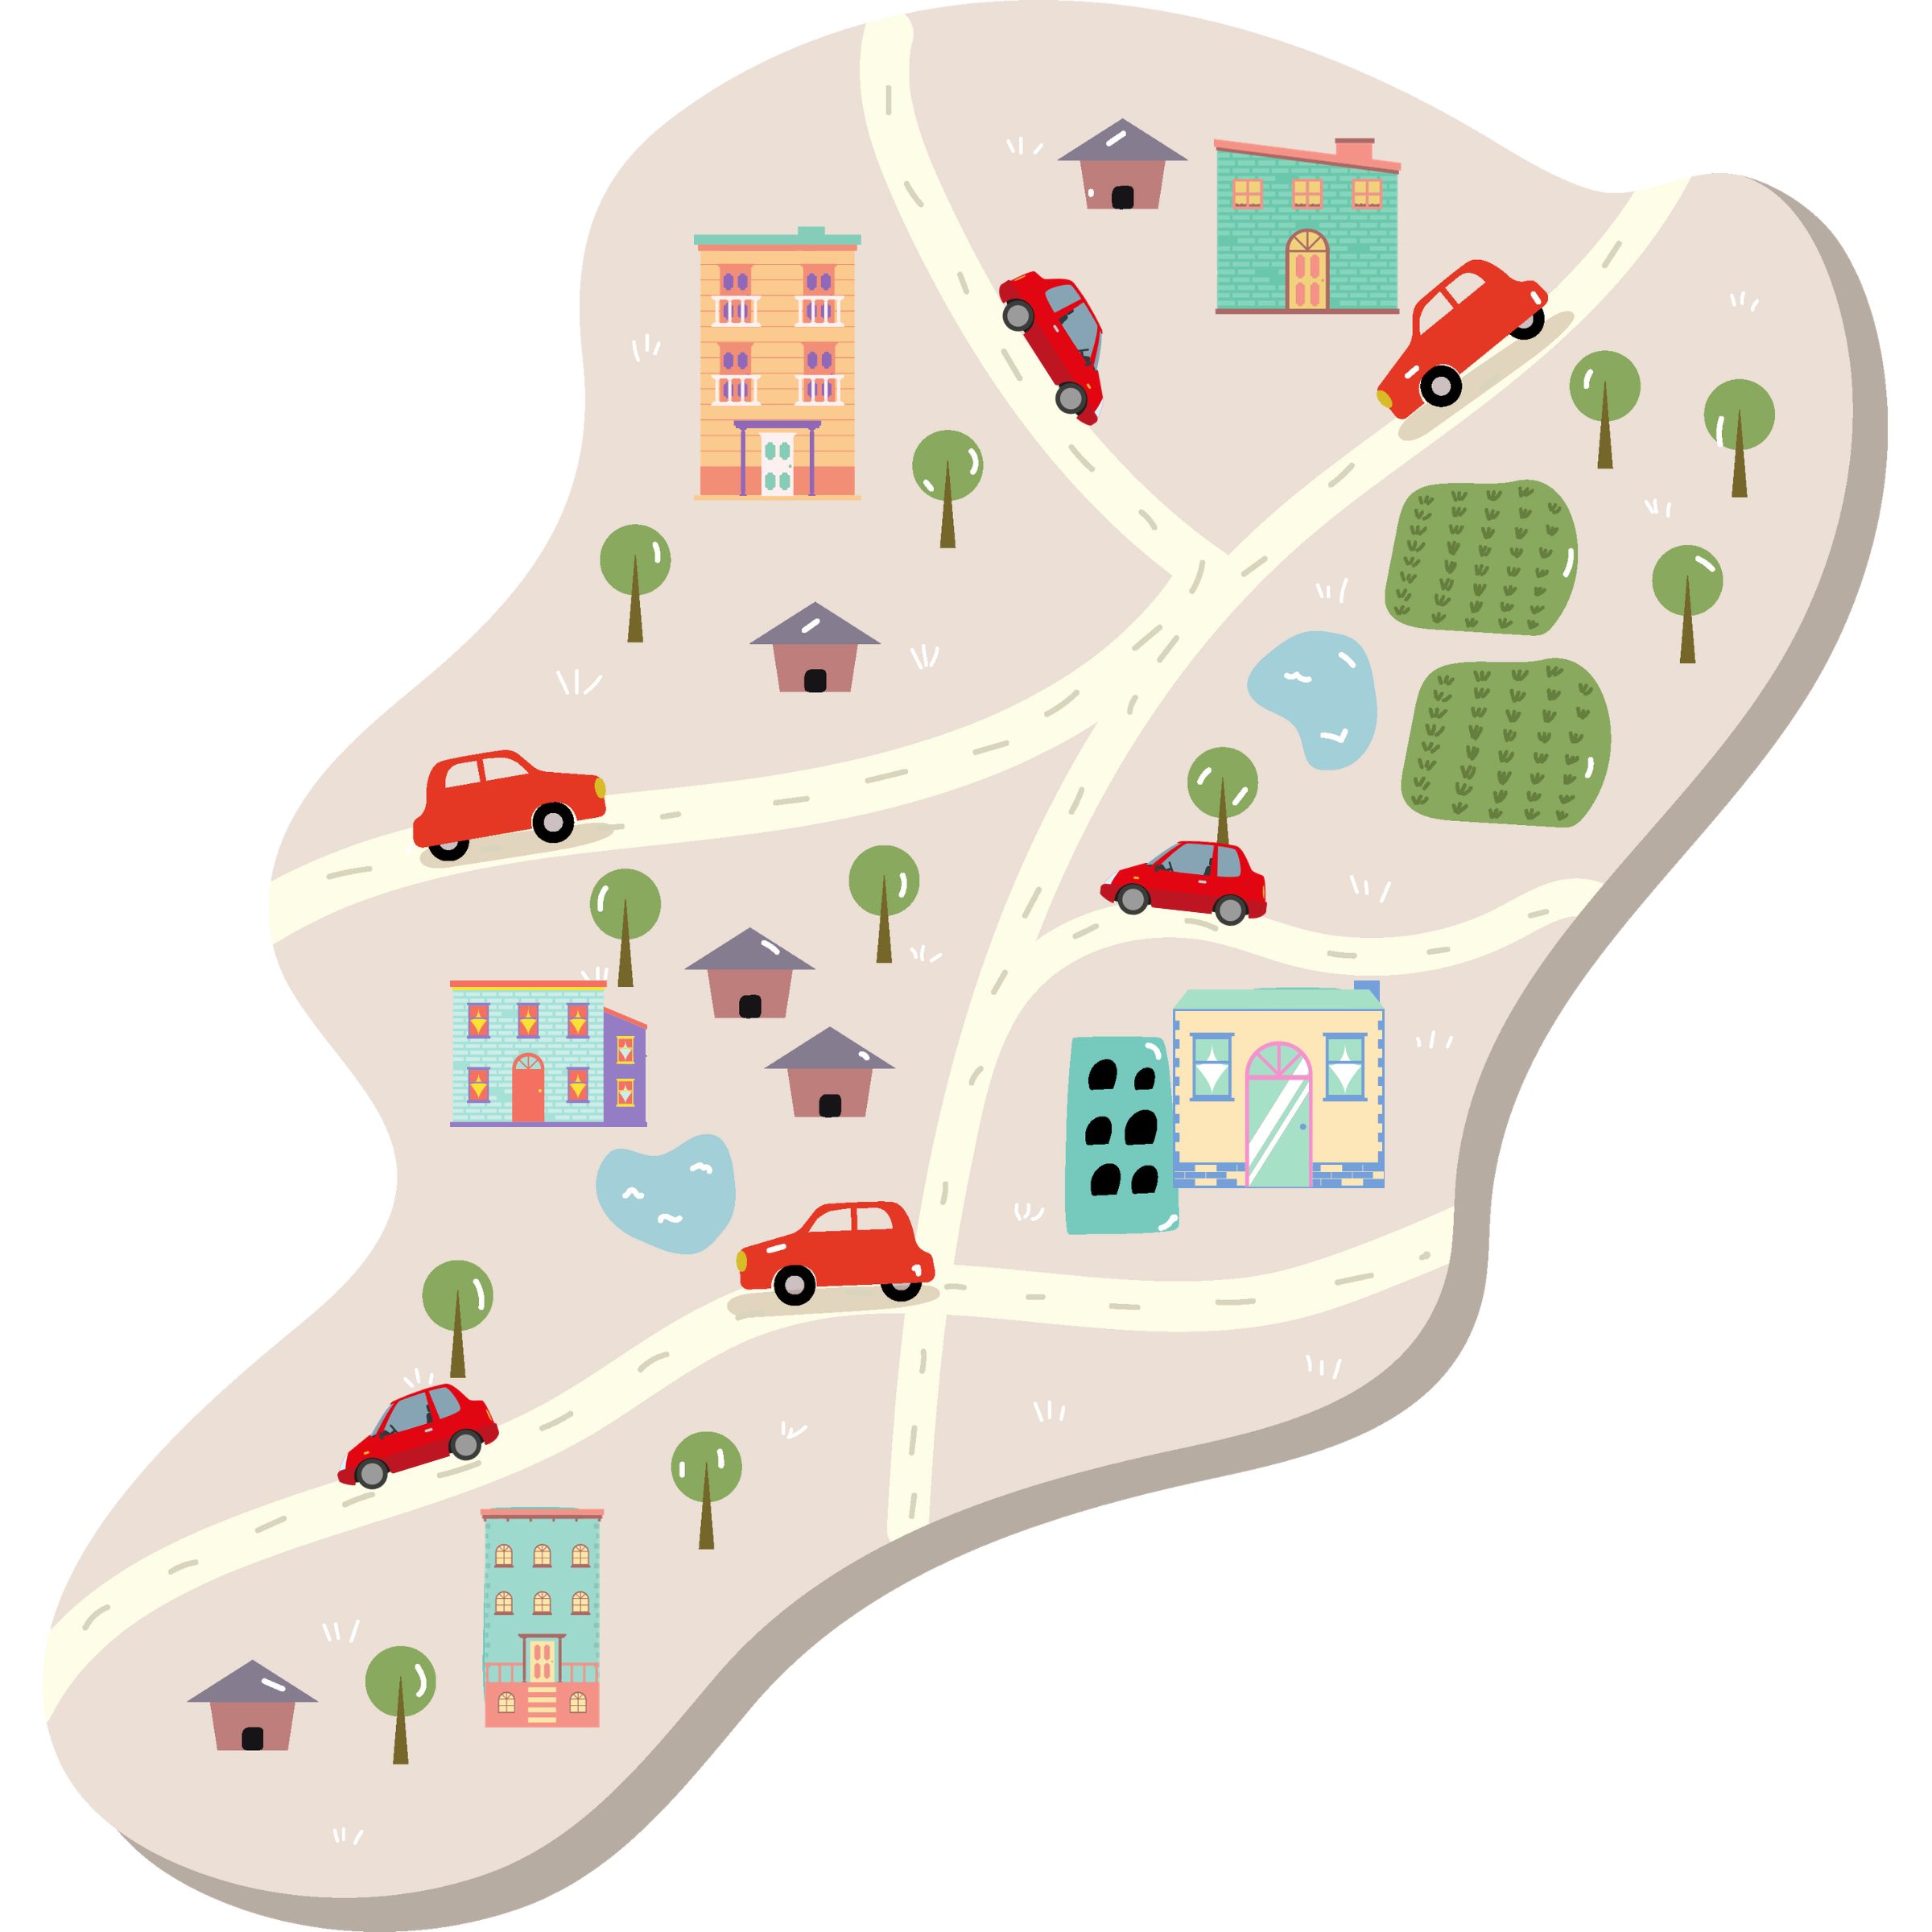 Image of Wellness Map with cars